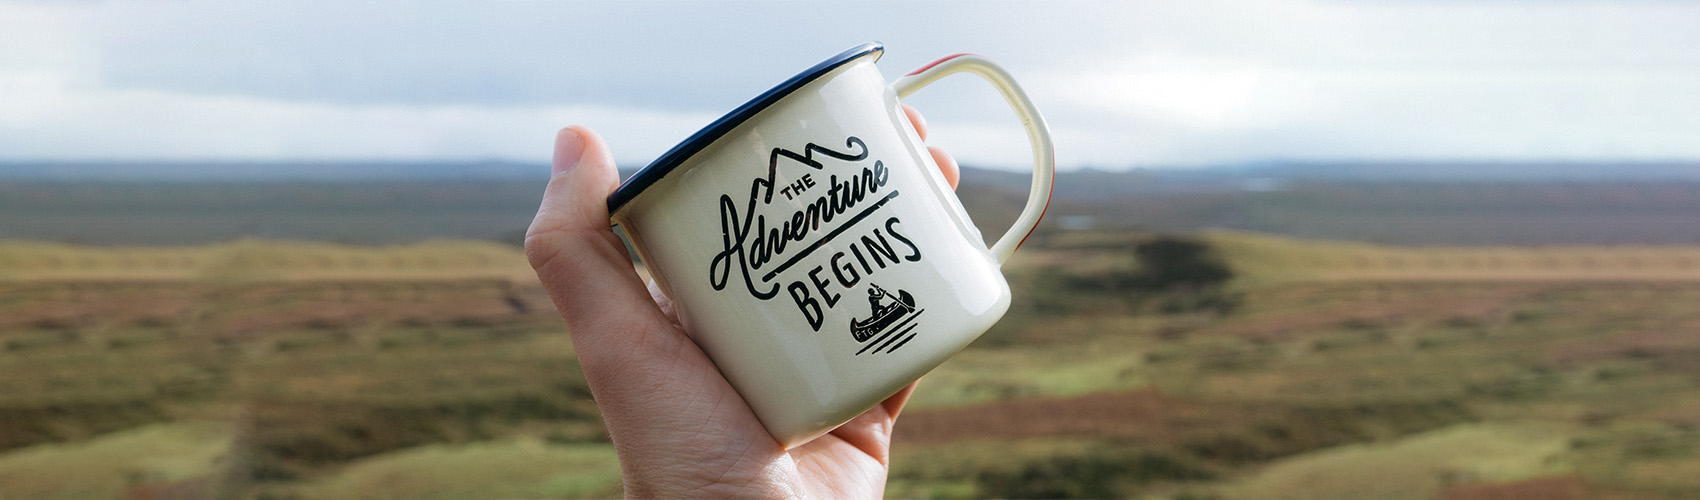 Orientation banner - photo of a mug that says "The Adventure Begins"